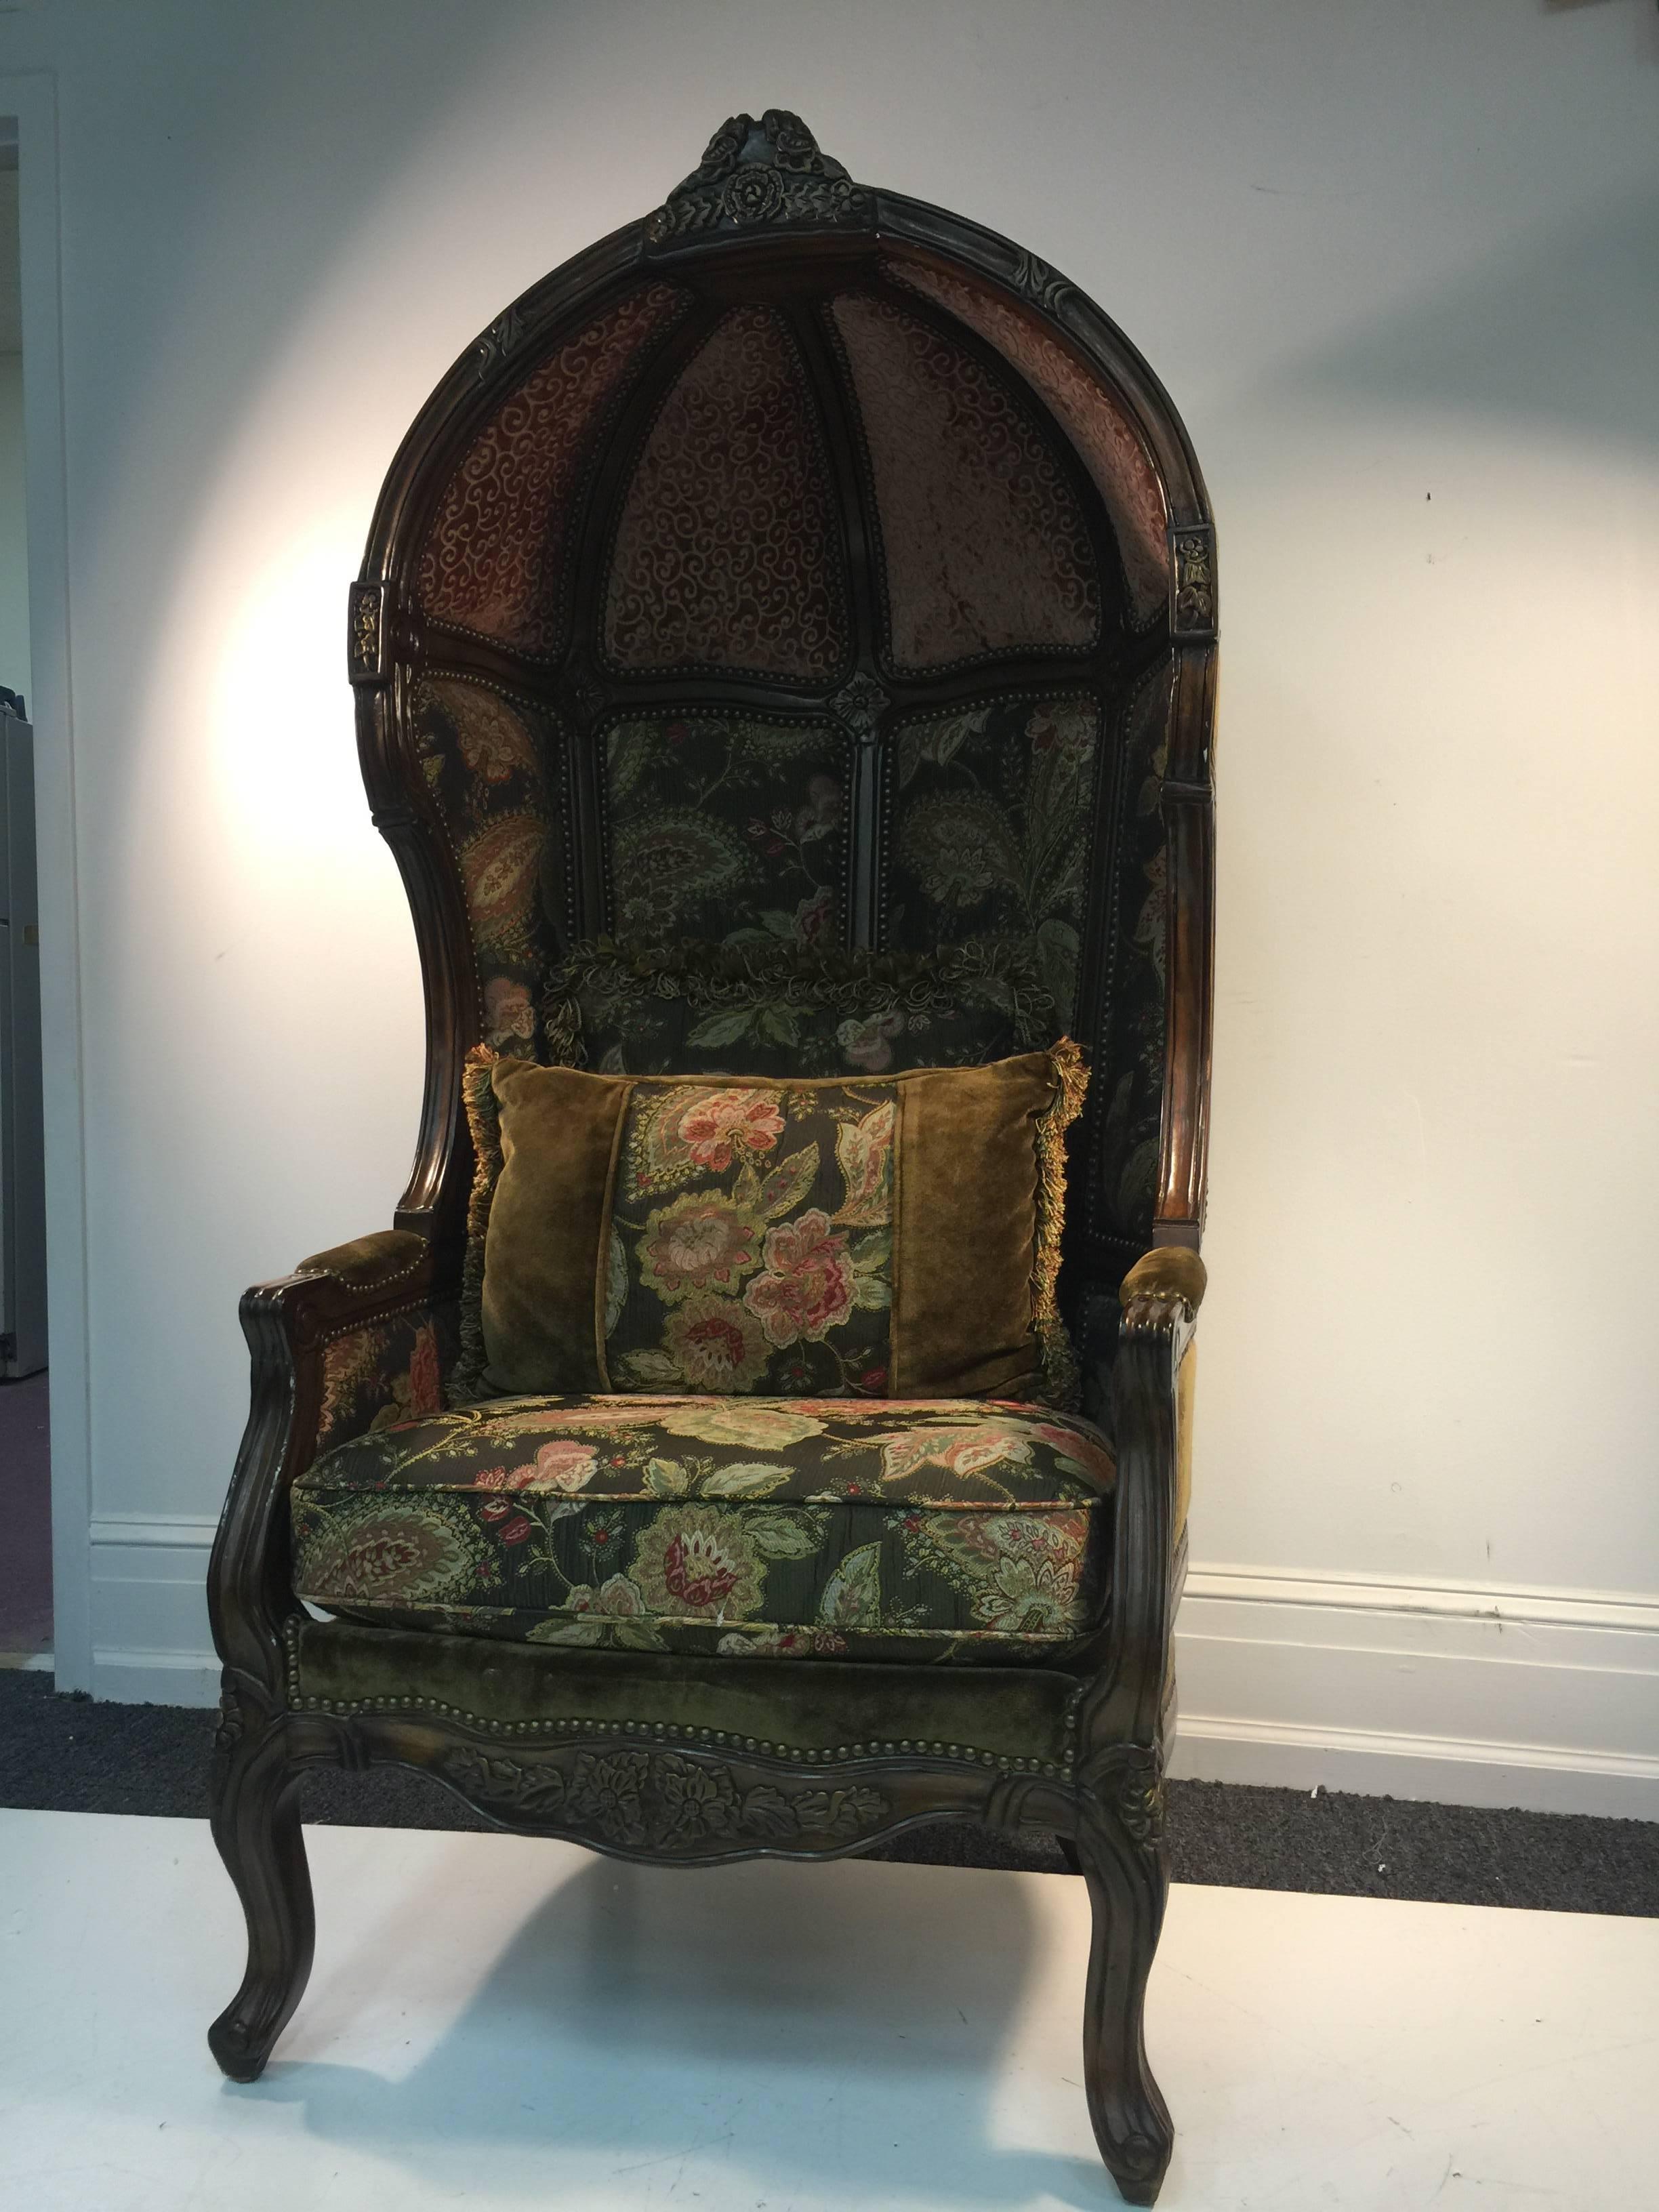 20th Century Exceptional Vintage Canopy Chair with Floral Accents, circa 1970 For Sale